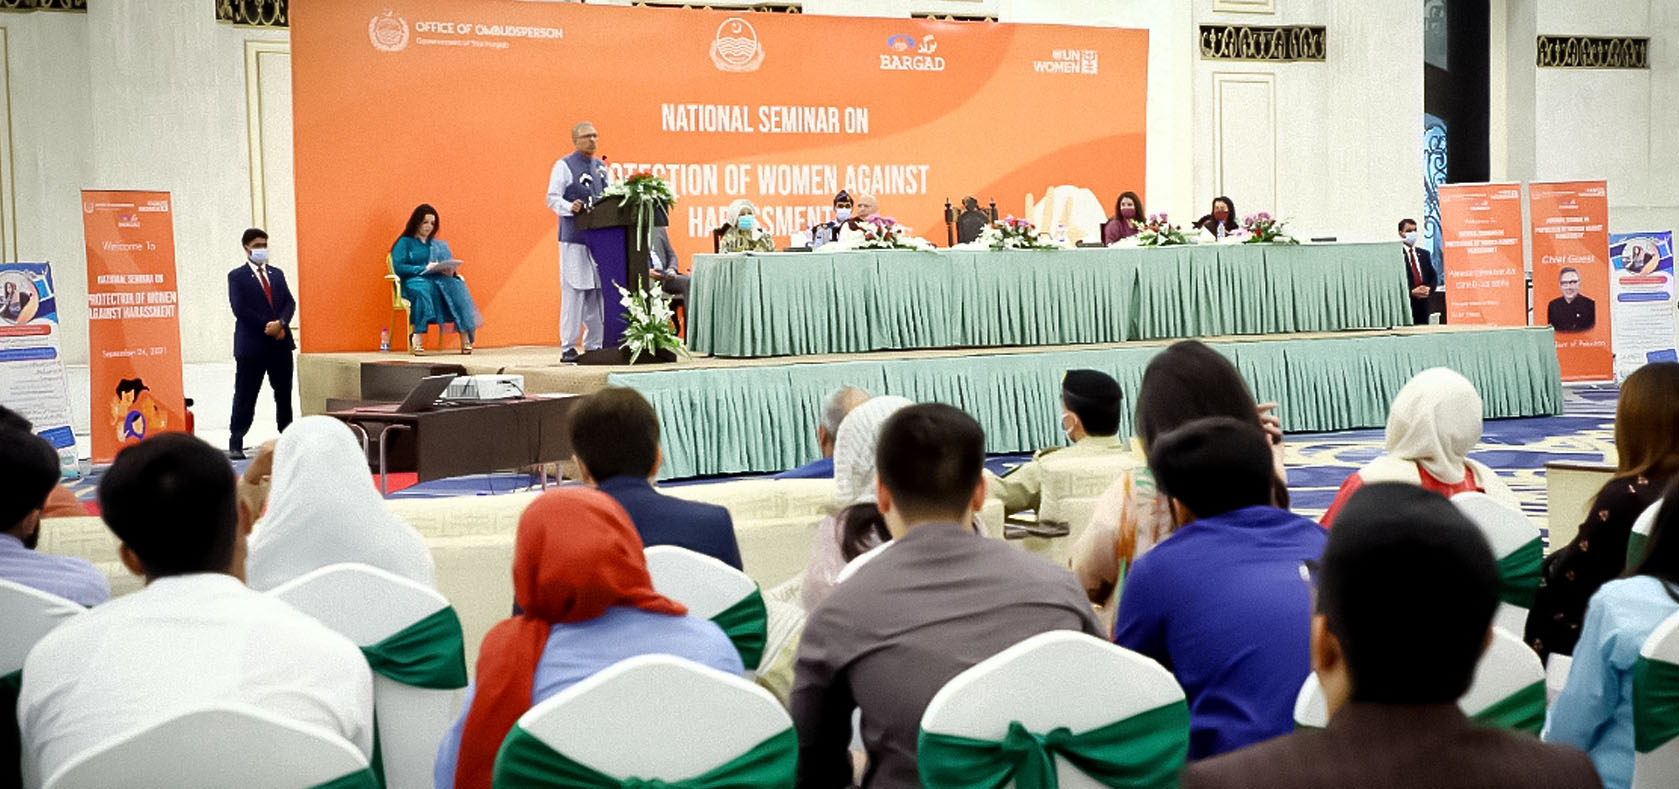 President of Pakistan Arif Alvi (centre, in blue) and Punjab Governor Chaudhry Muhammad Sarwar attend National Seminar on Protection of Women against Harassment along with other dignitaries. Photo: UN Women/Muhammad Adil